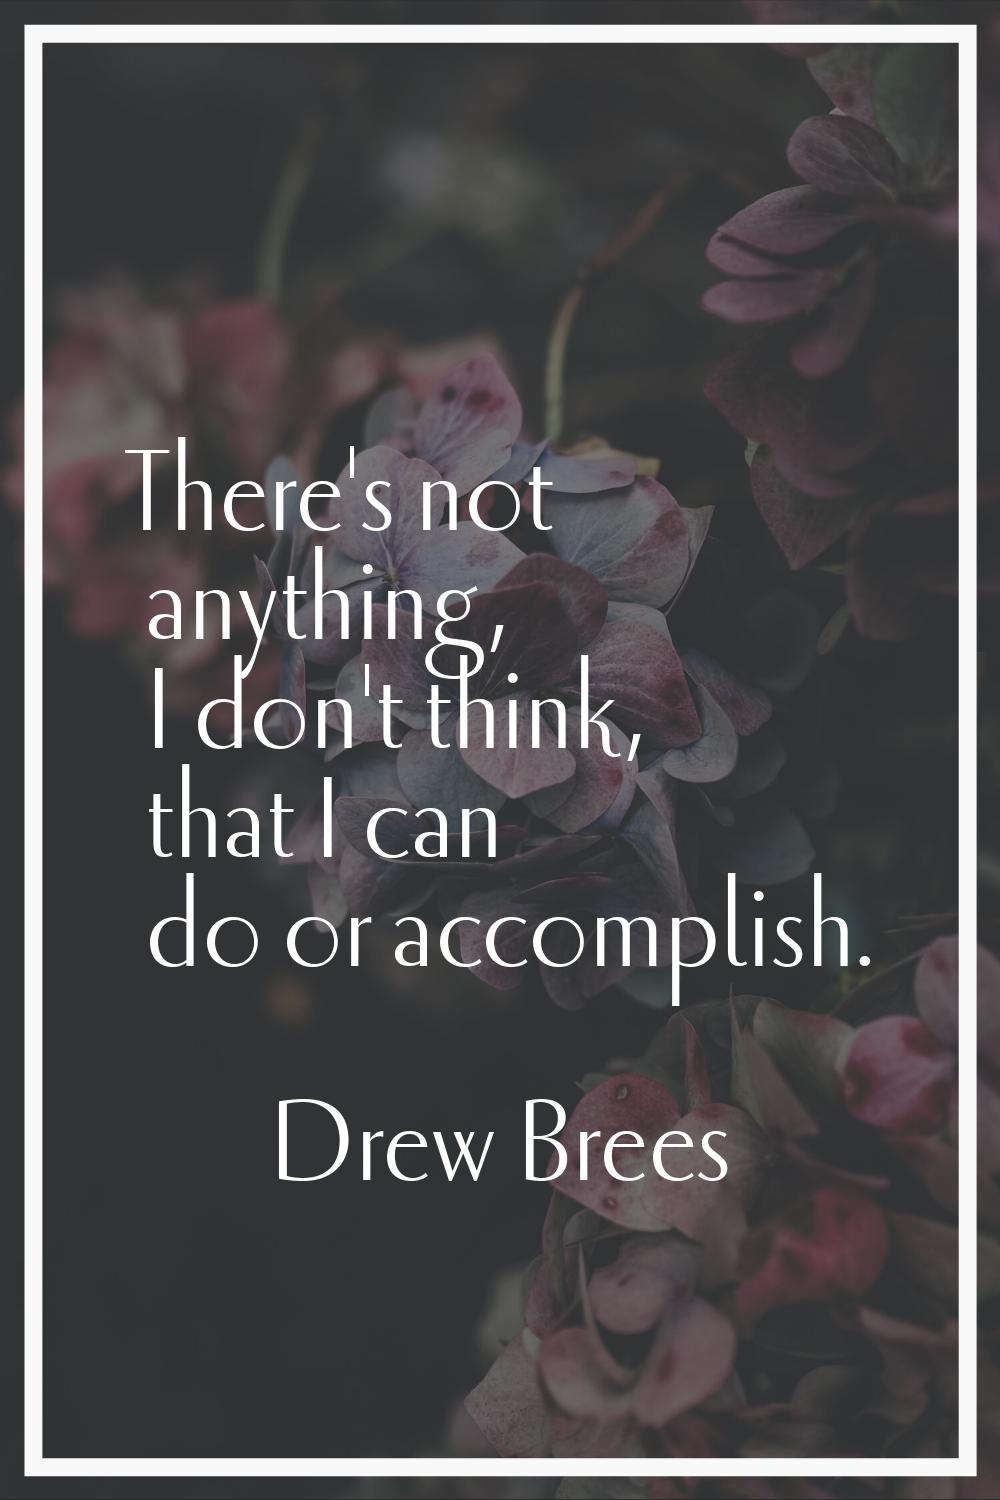 There's not anything, I don't think, that I can do or accomplish.